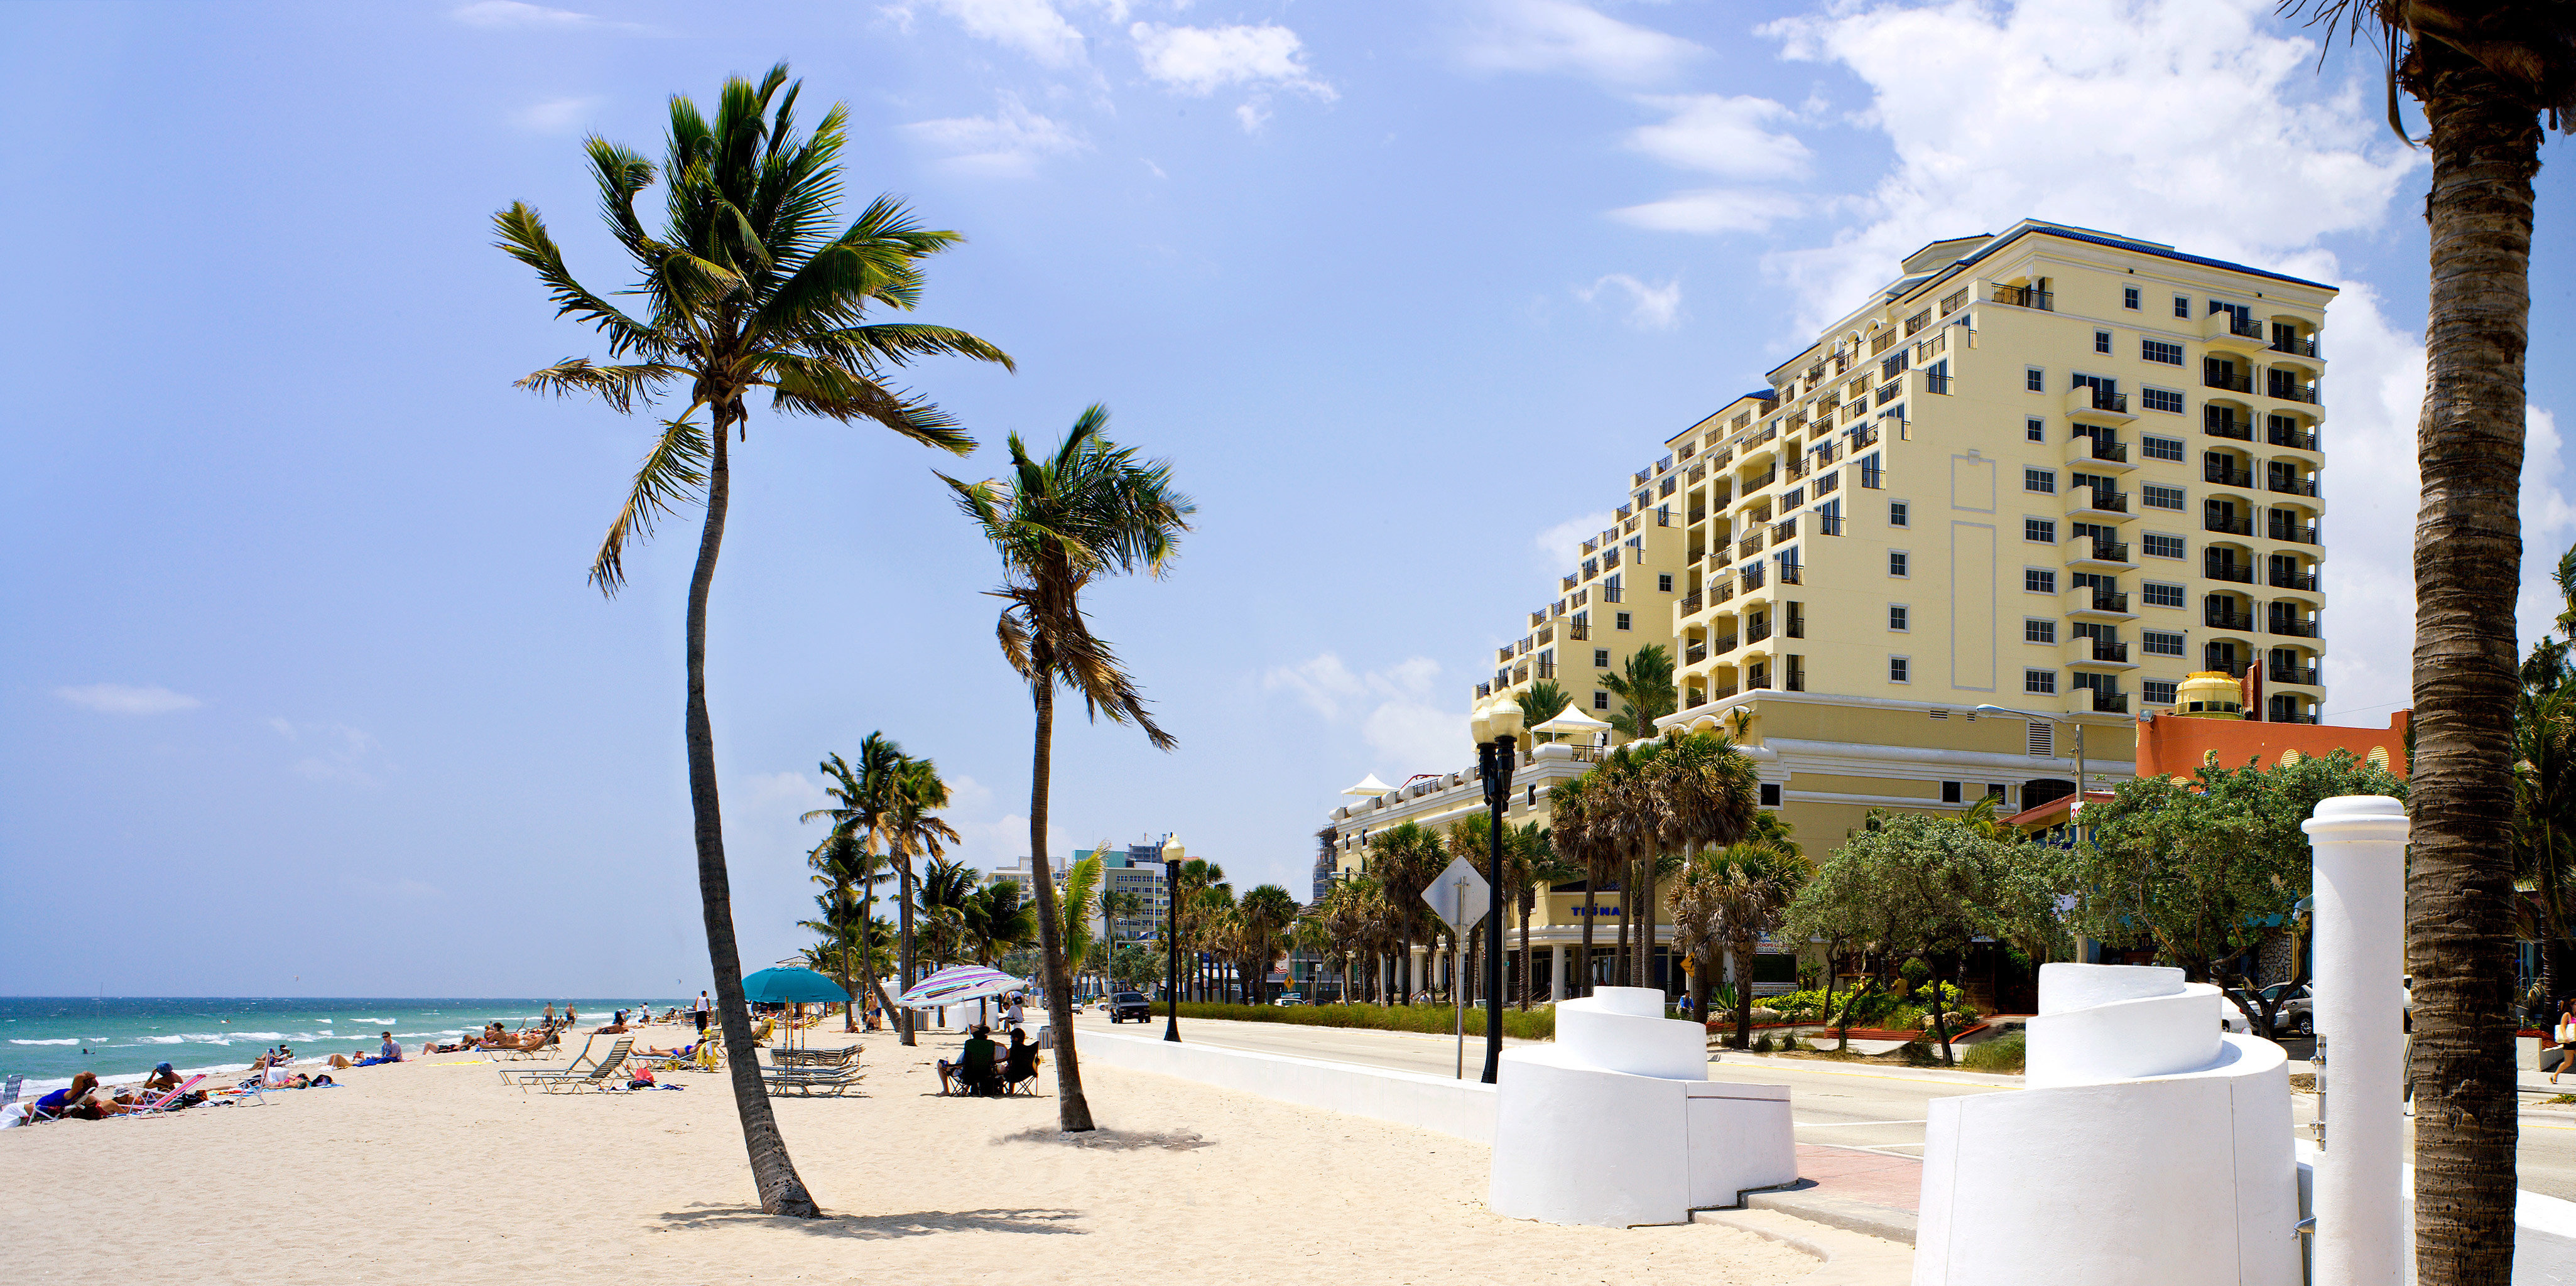 hotels by isle casino fort lauderdale fl